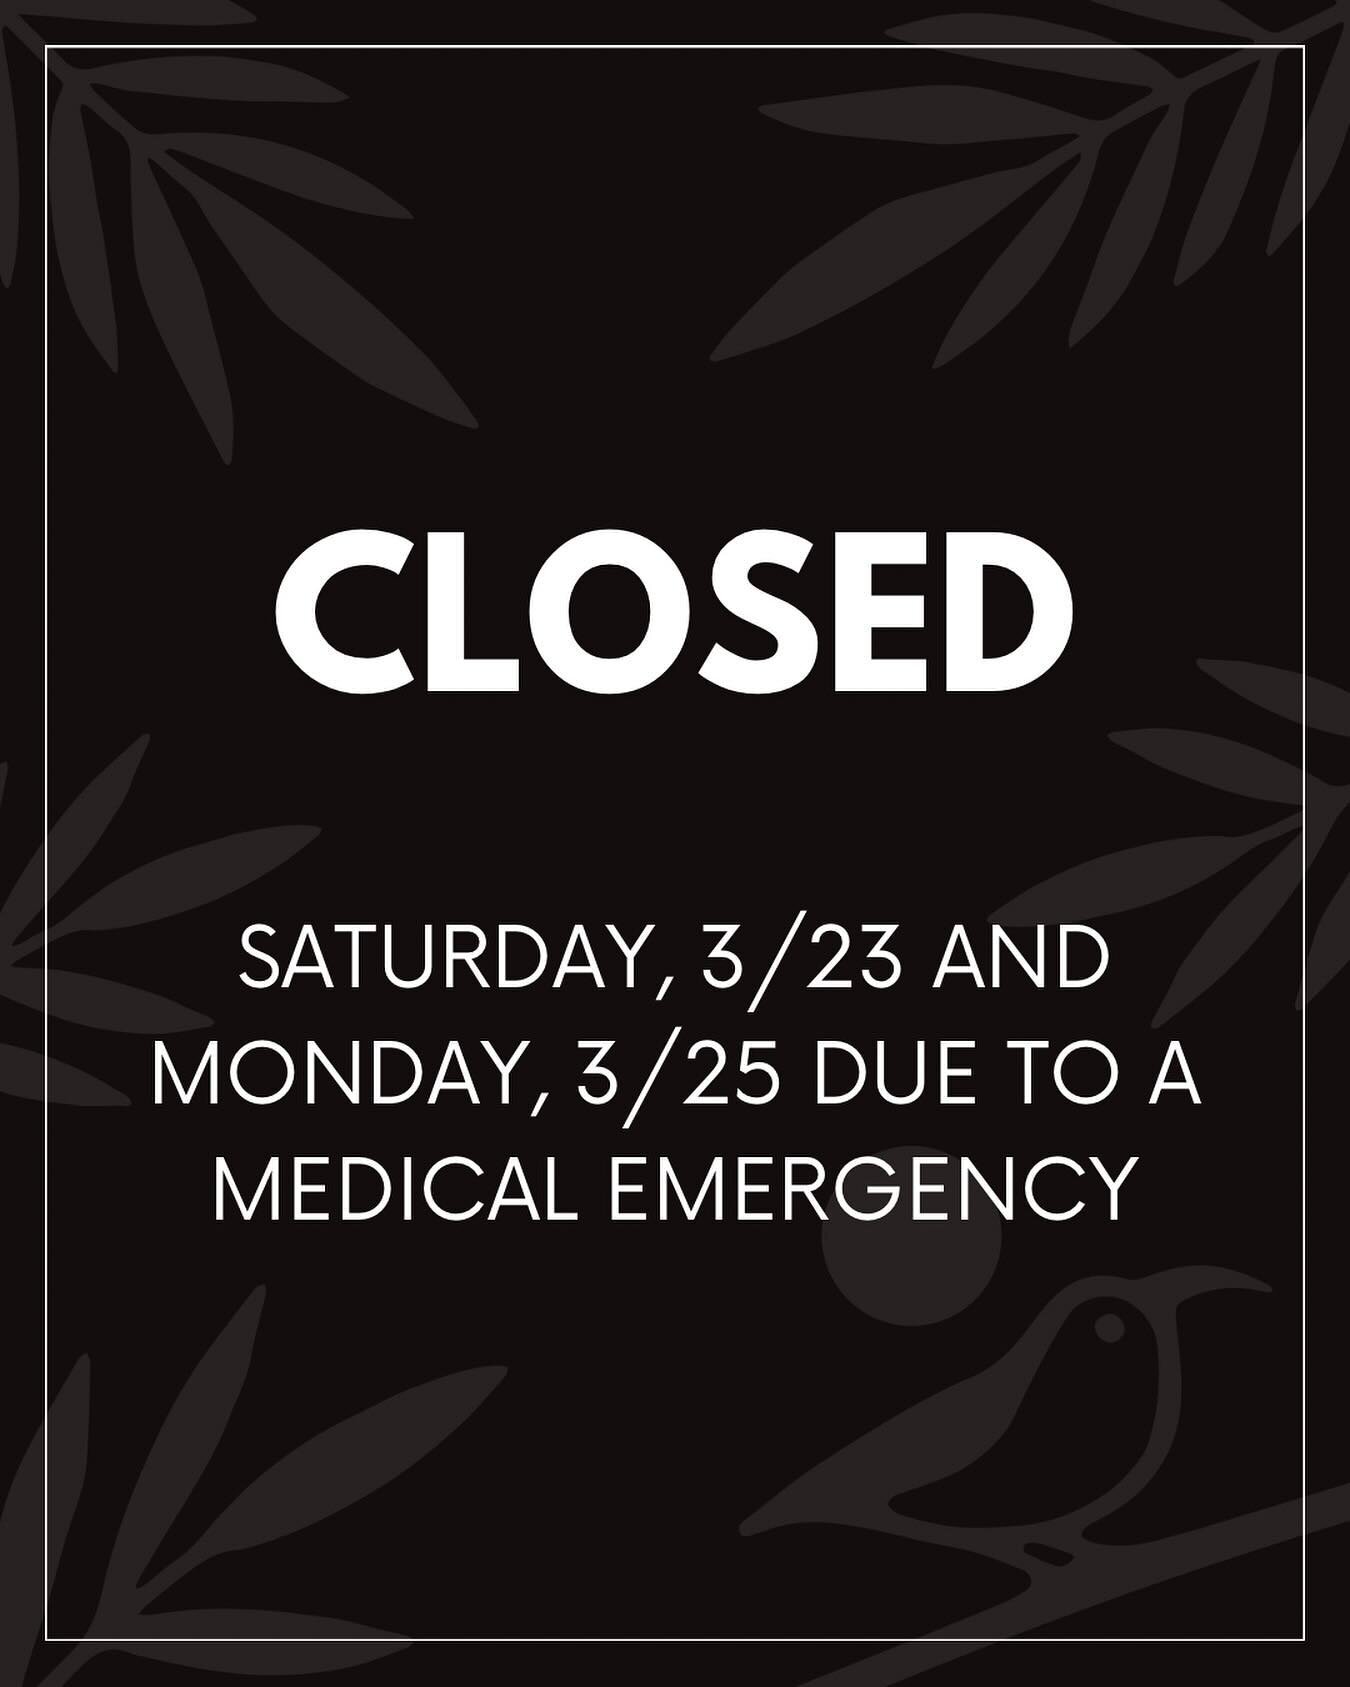 Hi all. Unfortunately we need to close for the Kaka&rsquo;ako Farmers Market on 3/23 and our pop-up at &lsquo;ili&rsquo;ili Cash and Carry on 3/25 due to a medical emergency one of us is experiencing. We will be contacting all who pre-ordered by emai